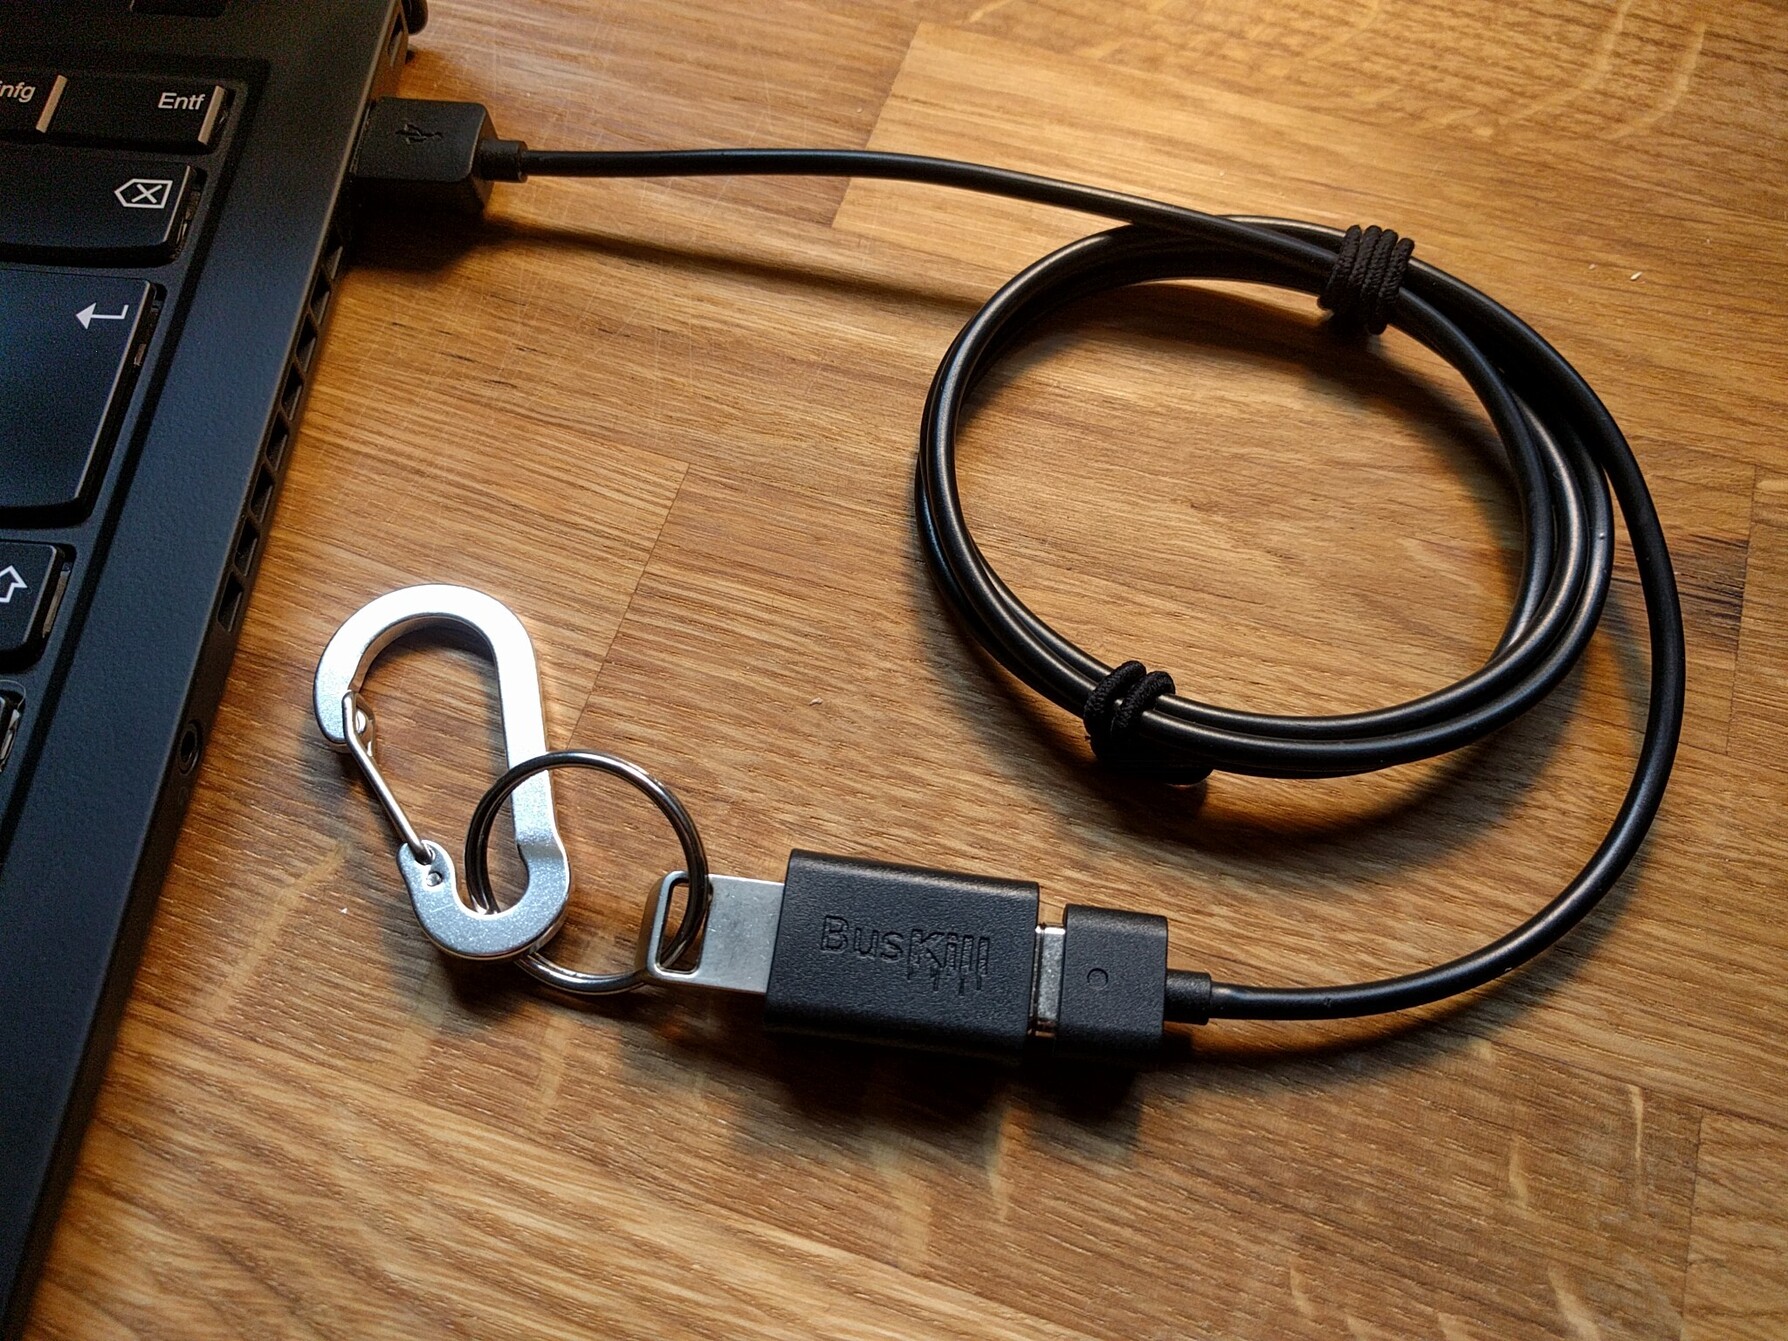 picture showing the fully-assembled BusKill cable with the USB Storage Drive connected to the magnetic breakaway connected to a laptop's USB port